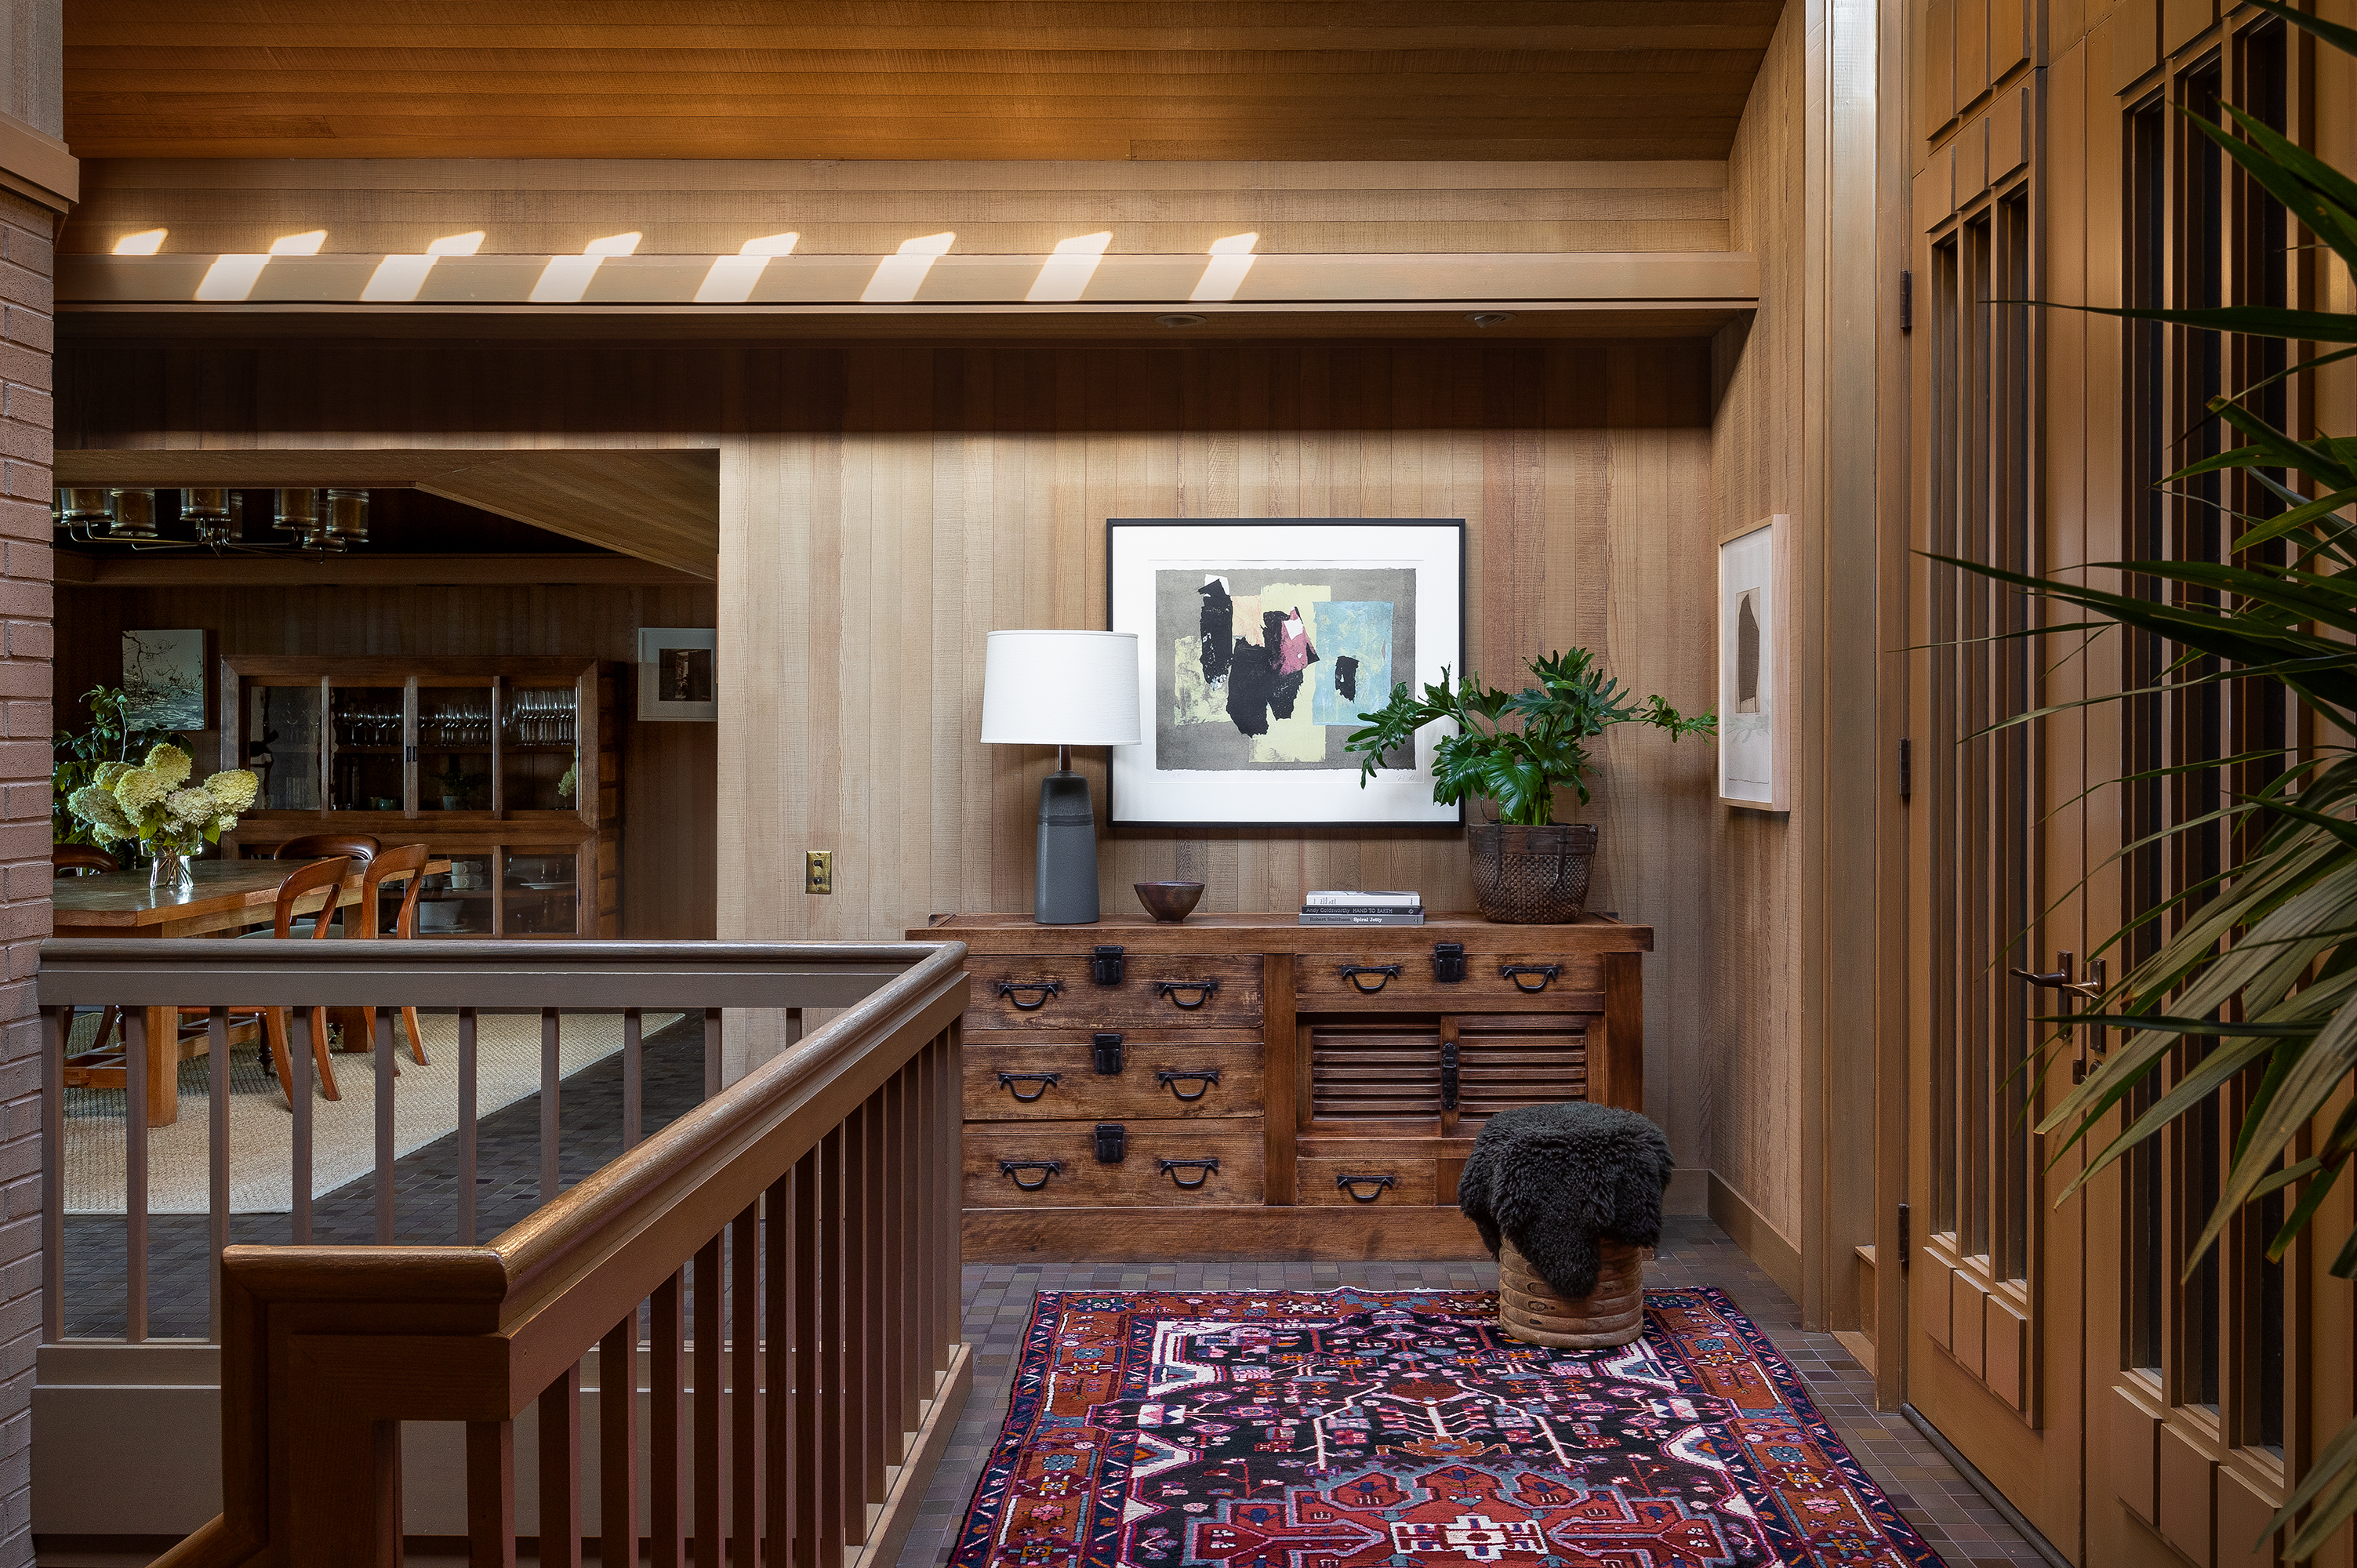 As you enter, cedar-clad walls embrace you, complemented by playful lighting from the skylight, casting warm, inviting shadows against the wood paneling.